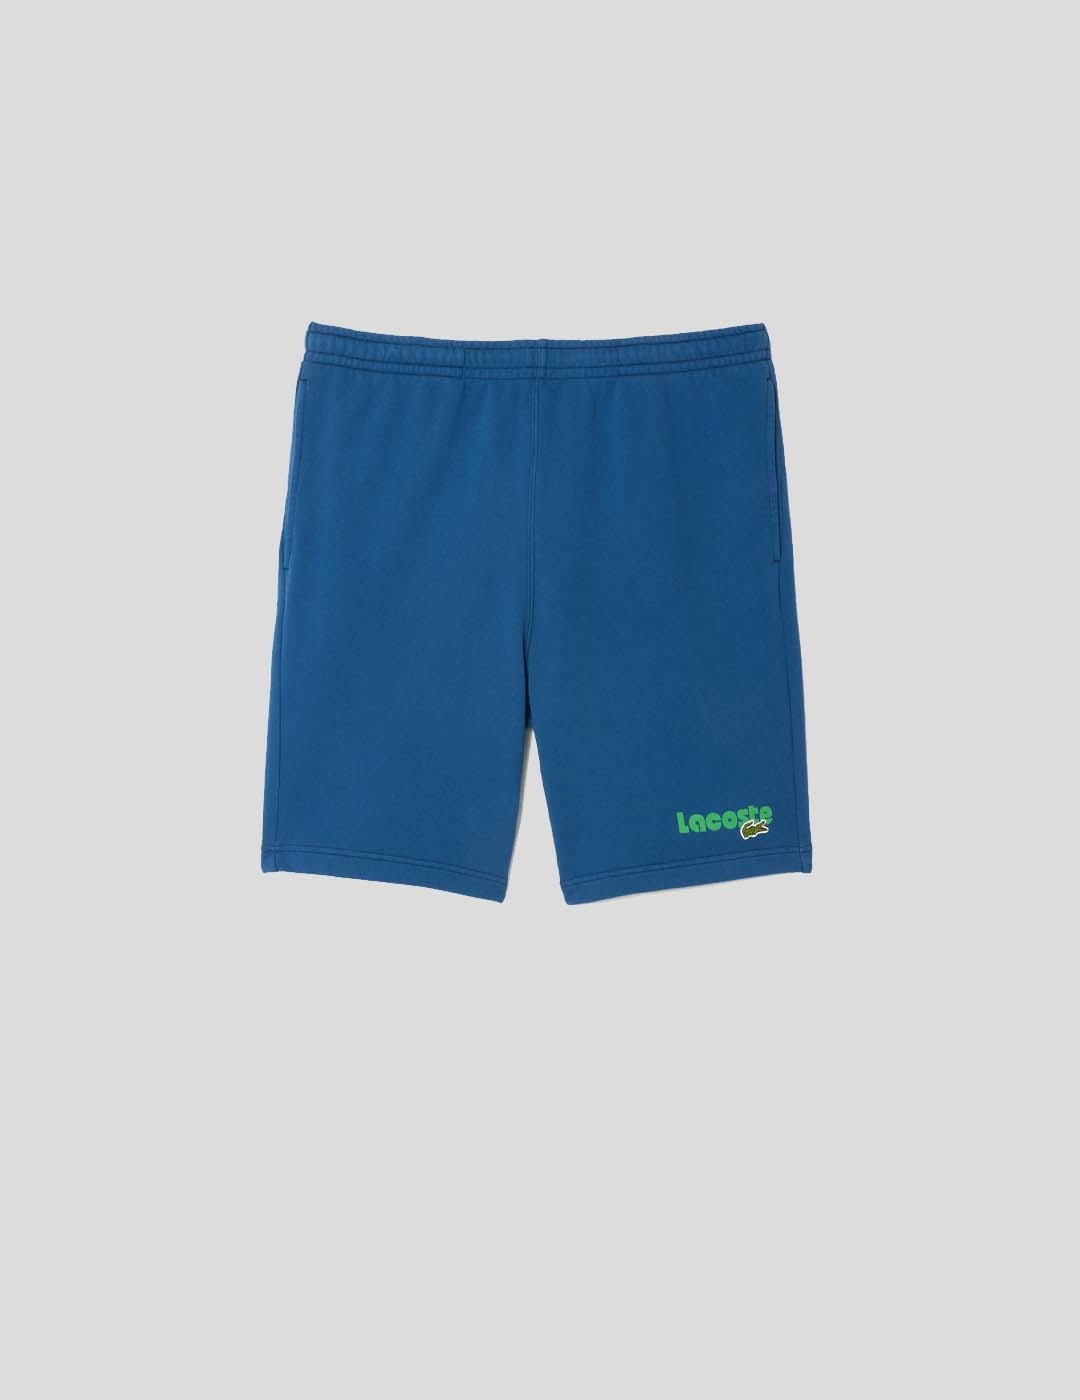 SHORTS LACOSTE WASHED EFFECT PRINTED SHORTS   SPHERE